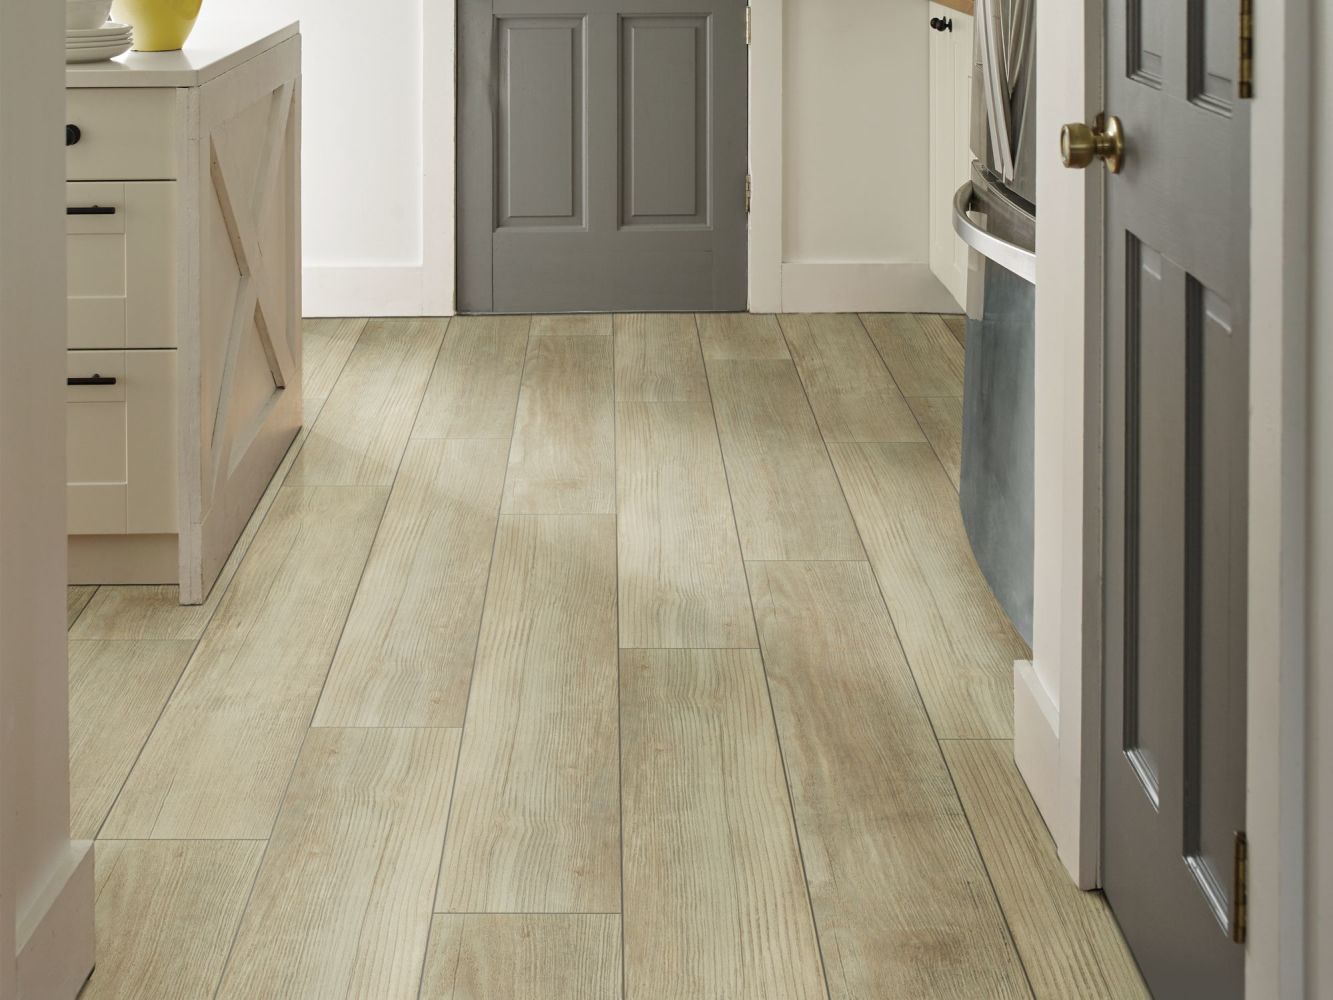 Shaw Floors Resilient Property Solutions Bonafide Hd+accent Cypress 00483_VE427